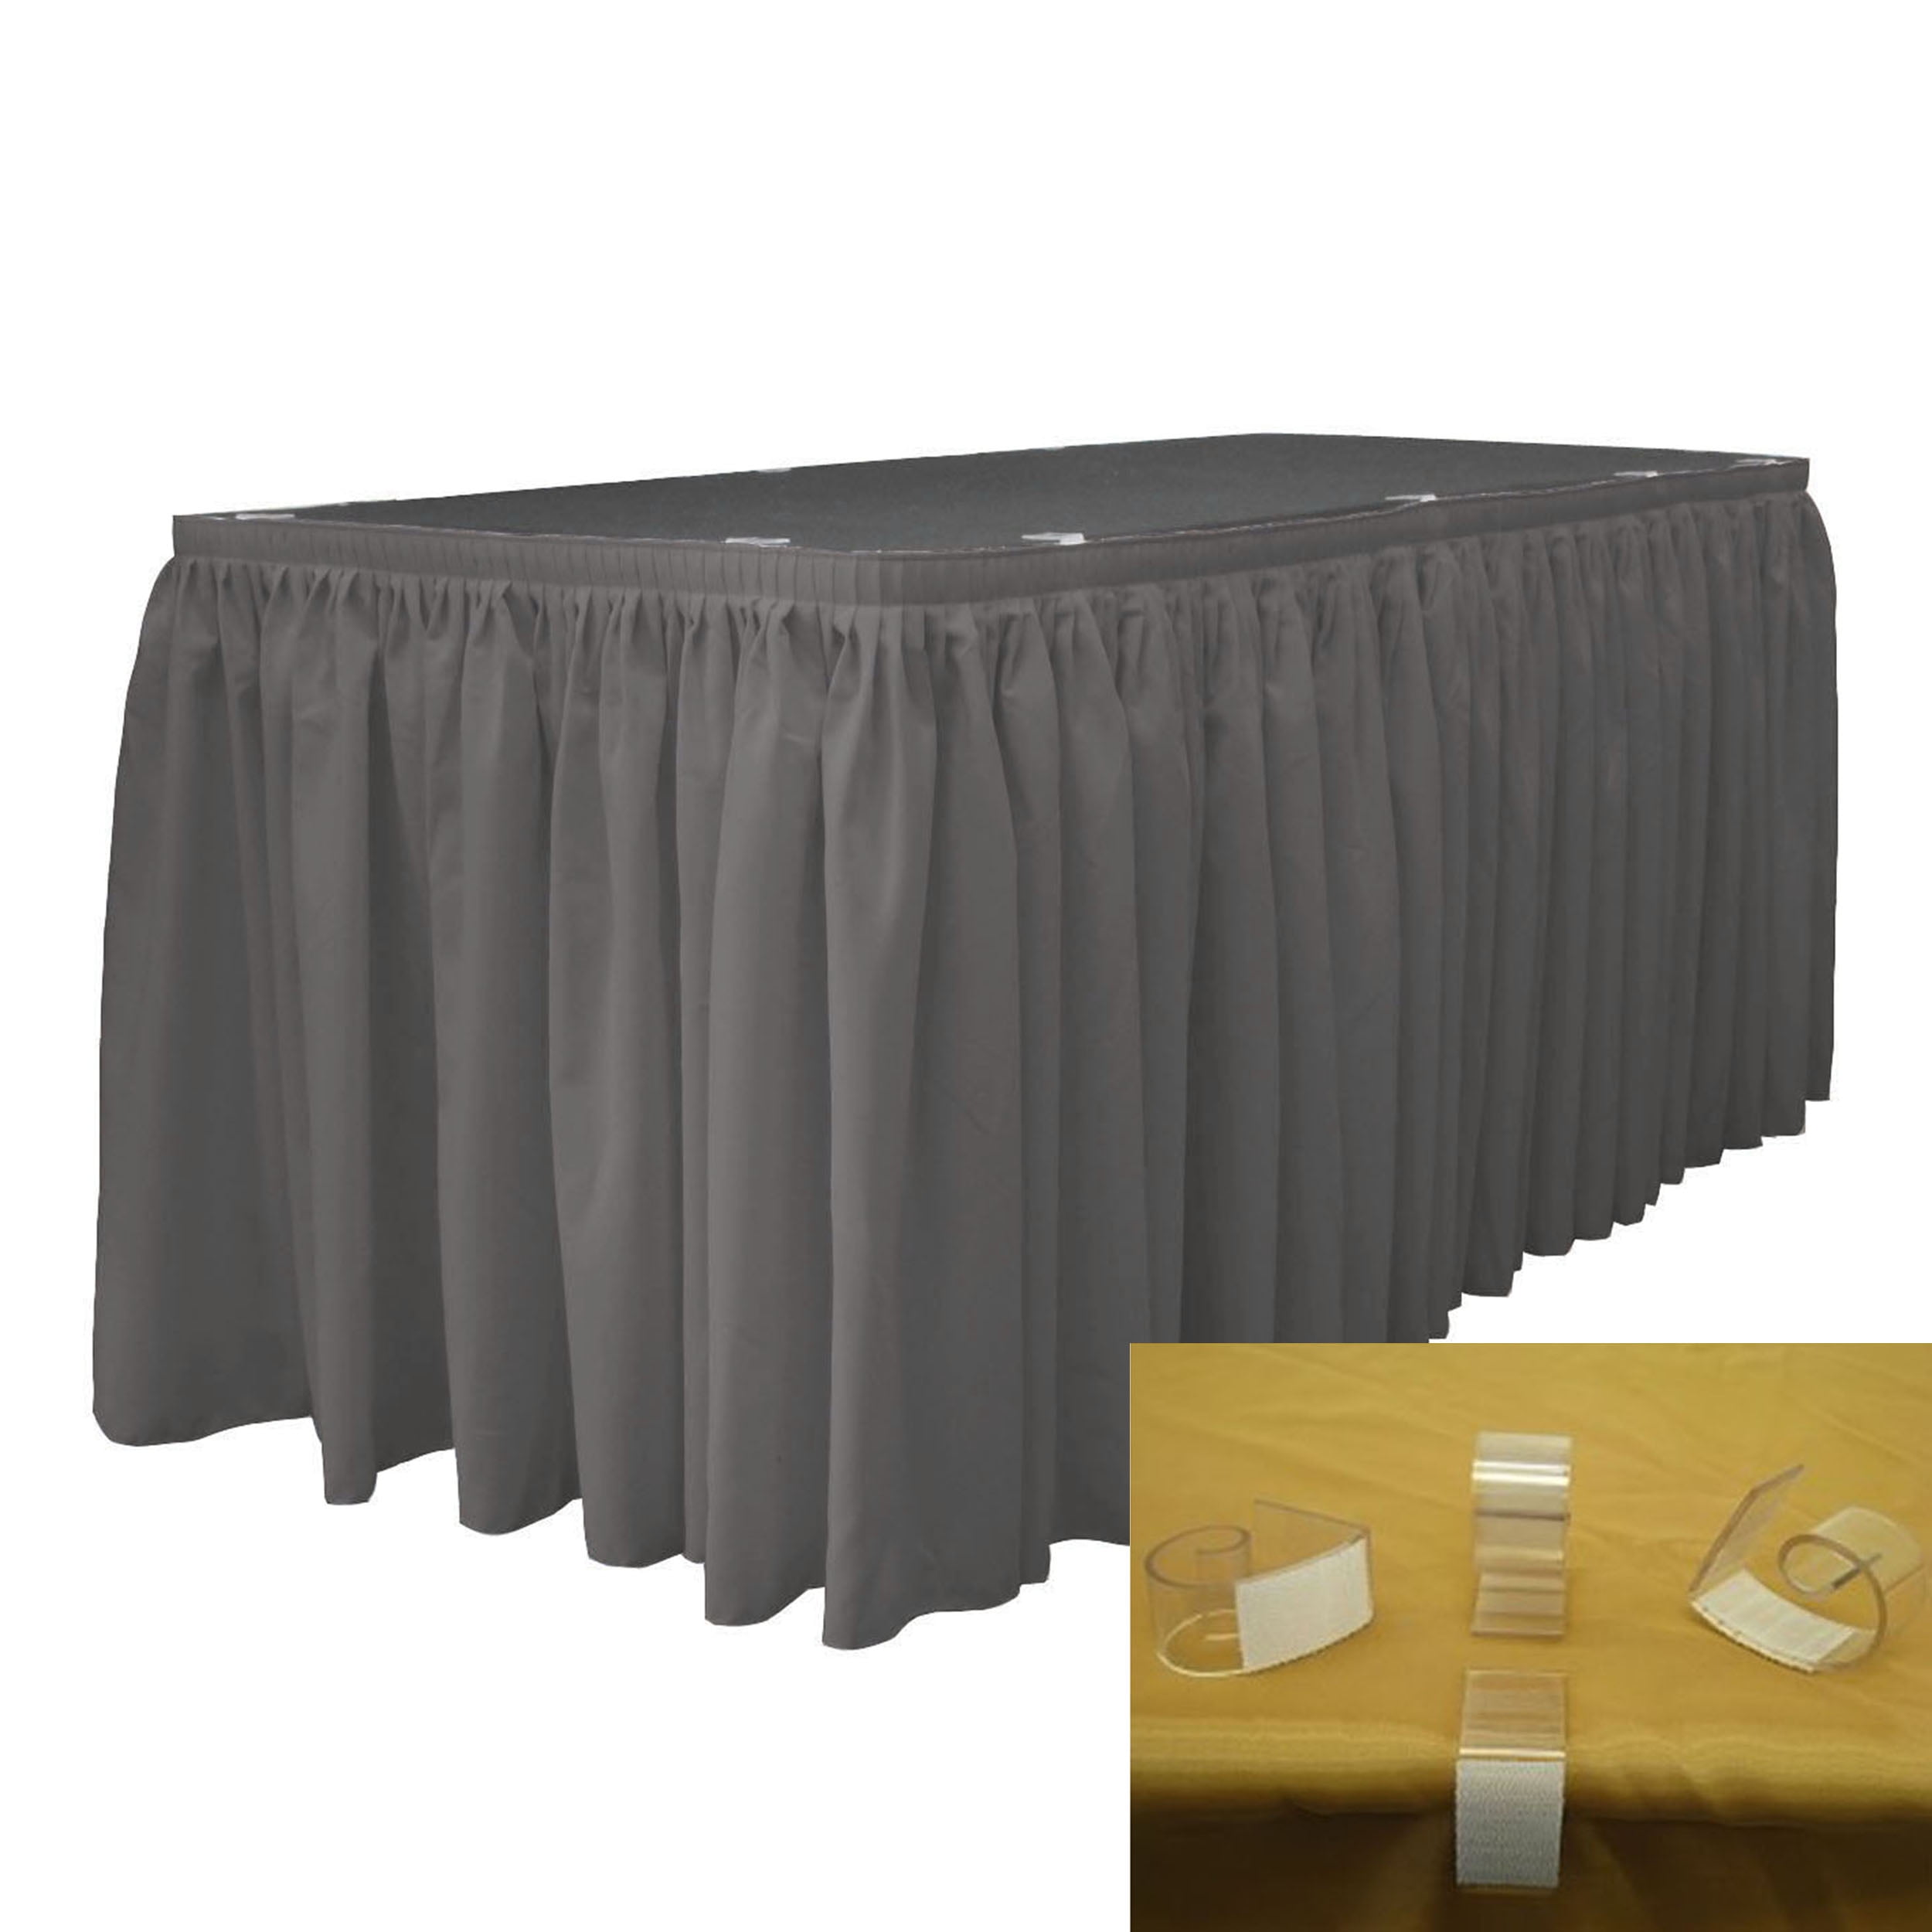 12 Table Skirts 14ft x 29" Banquet 100% Polyester Skirting 3 Colors Made USA 